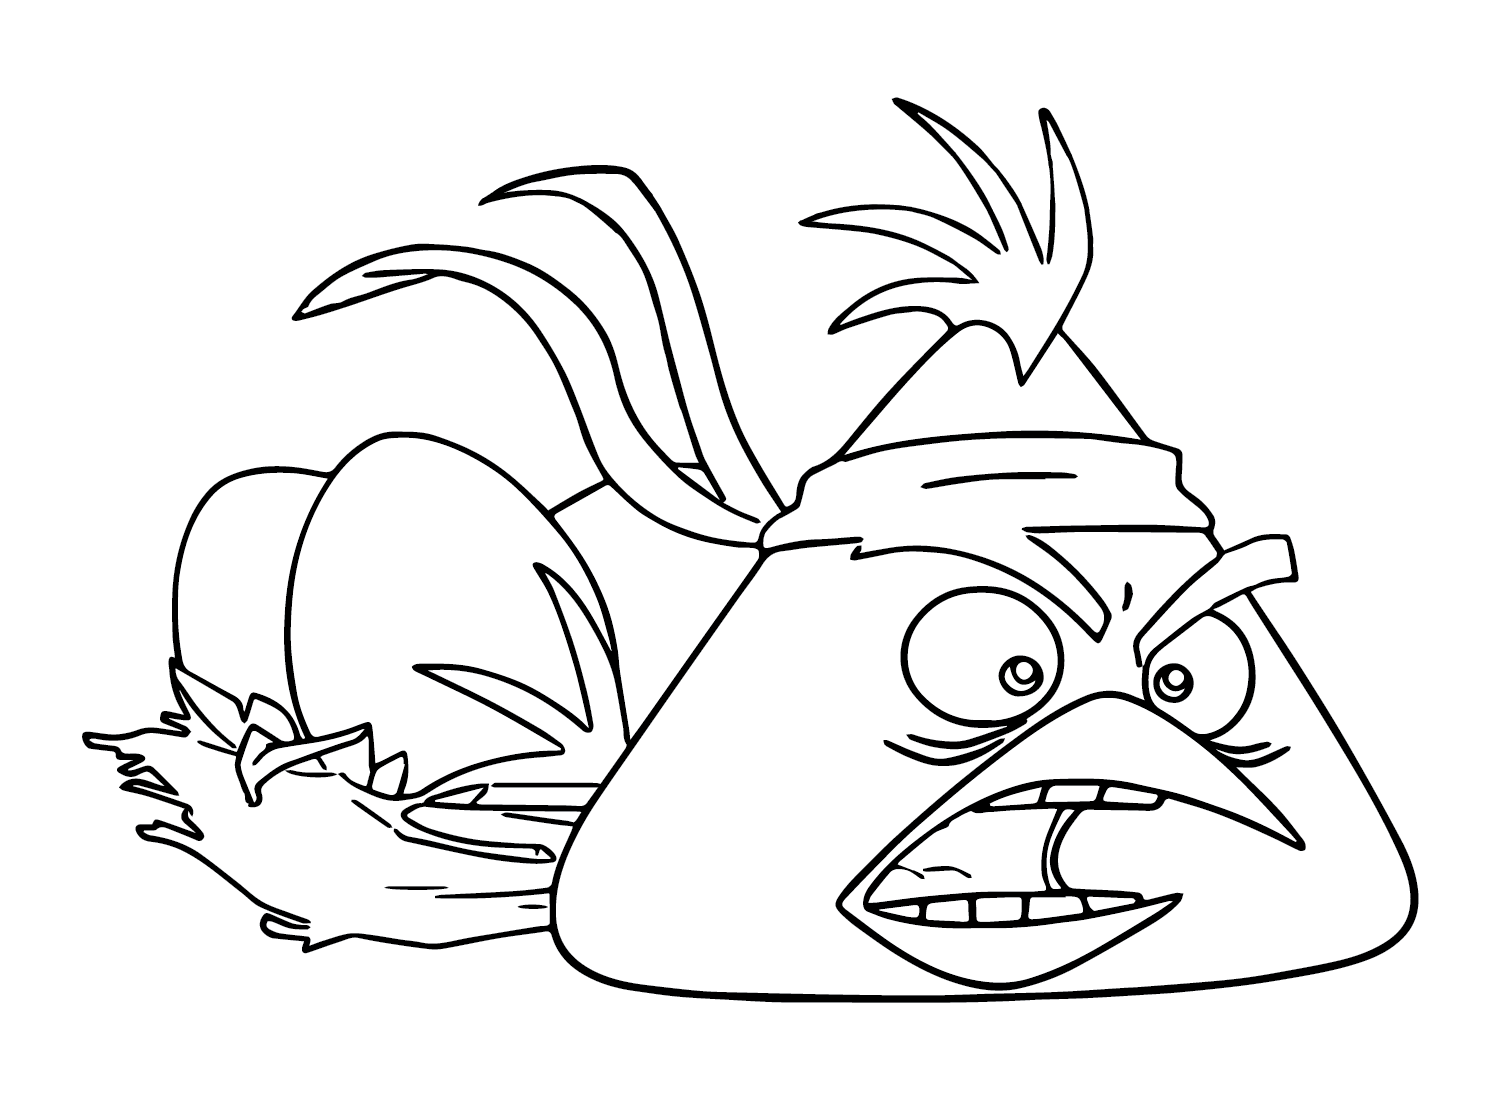 Eggs with Chuck (Angry Bird) Coloring Page